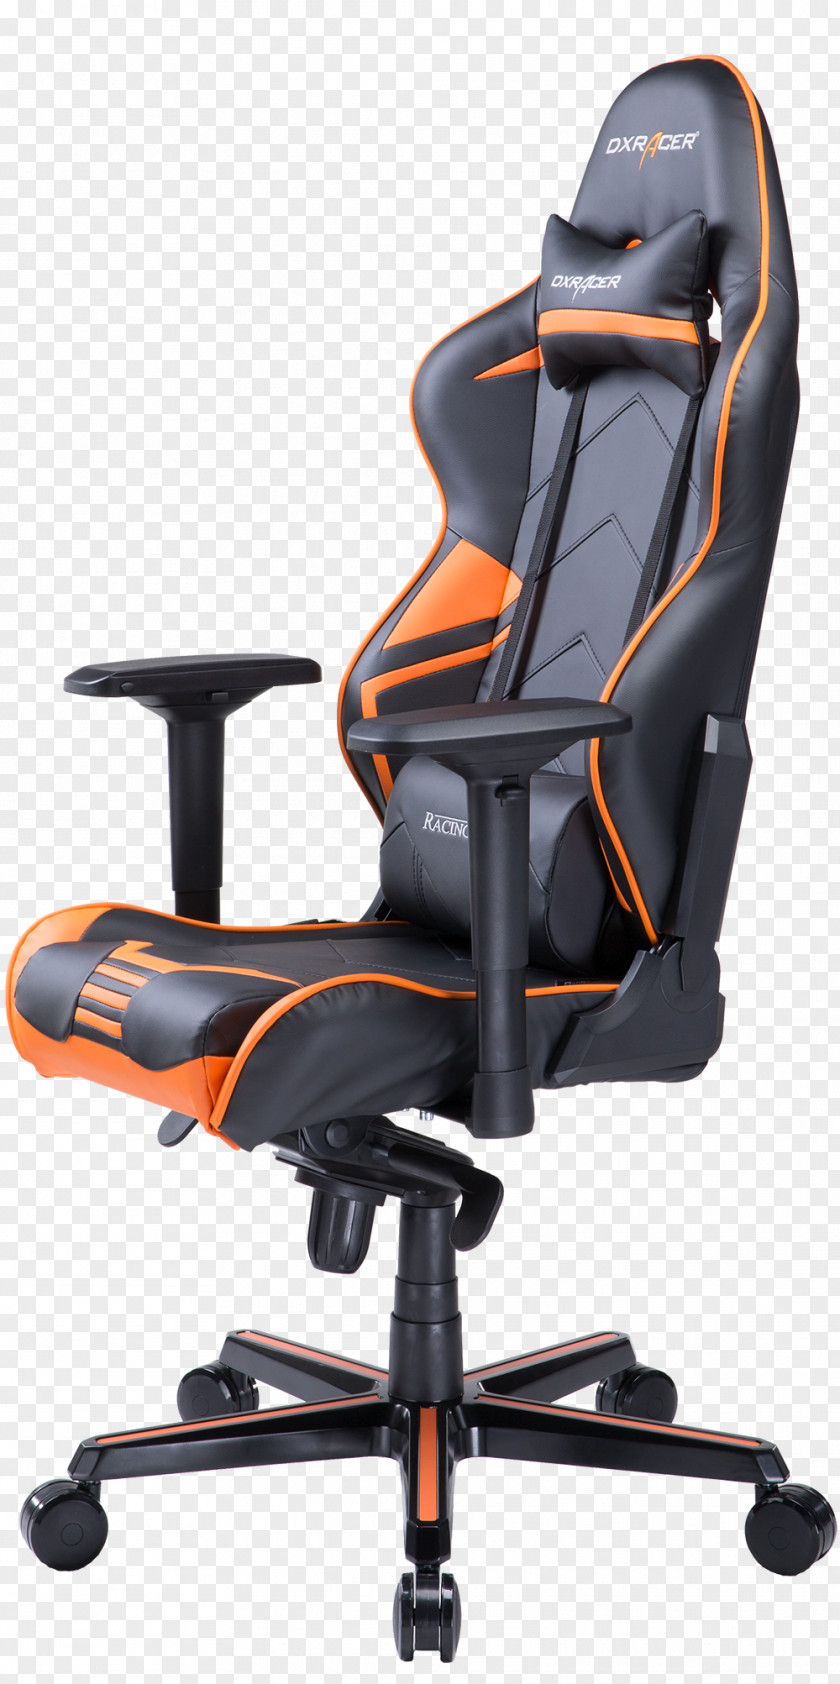 Chair Office & Desk Chairs Gaming Furniture DXRacer PNG